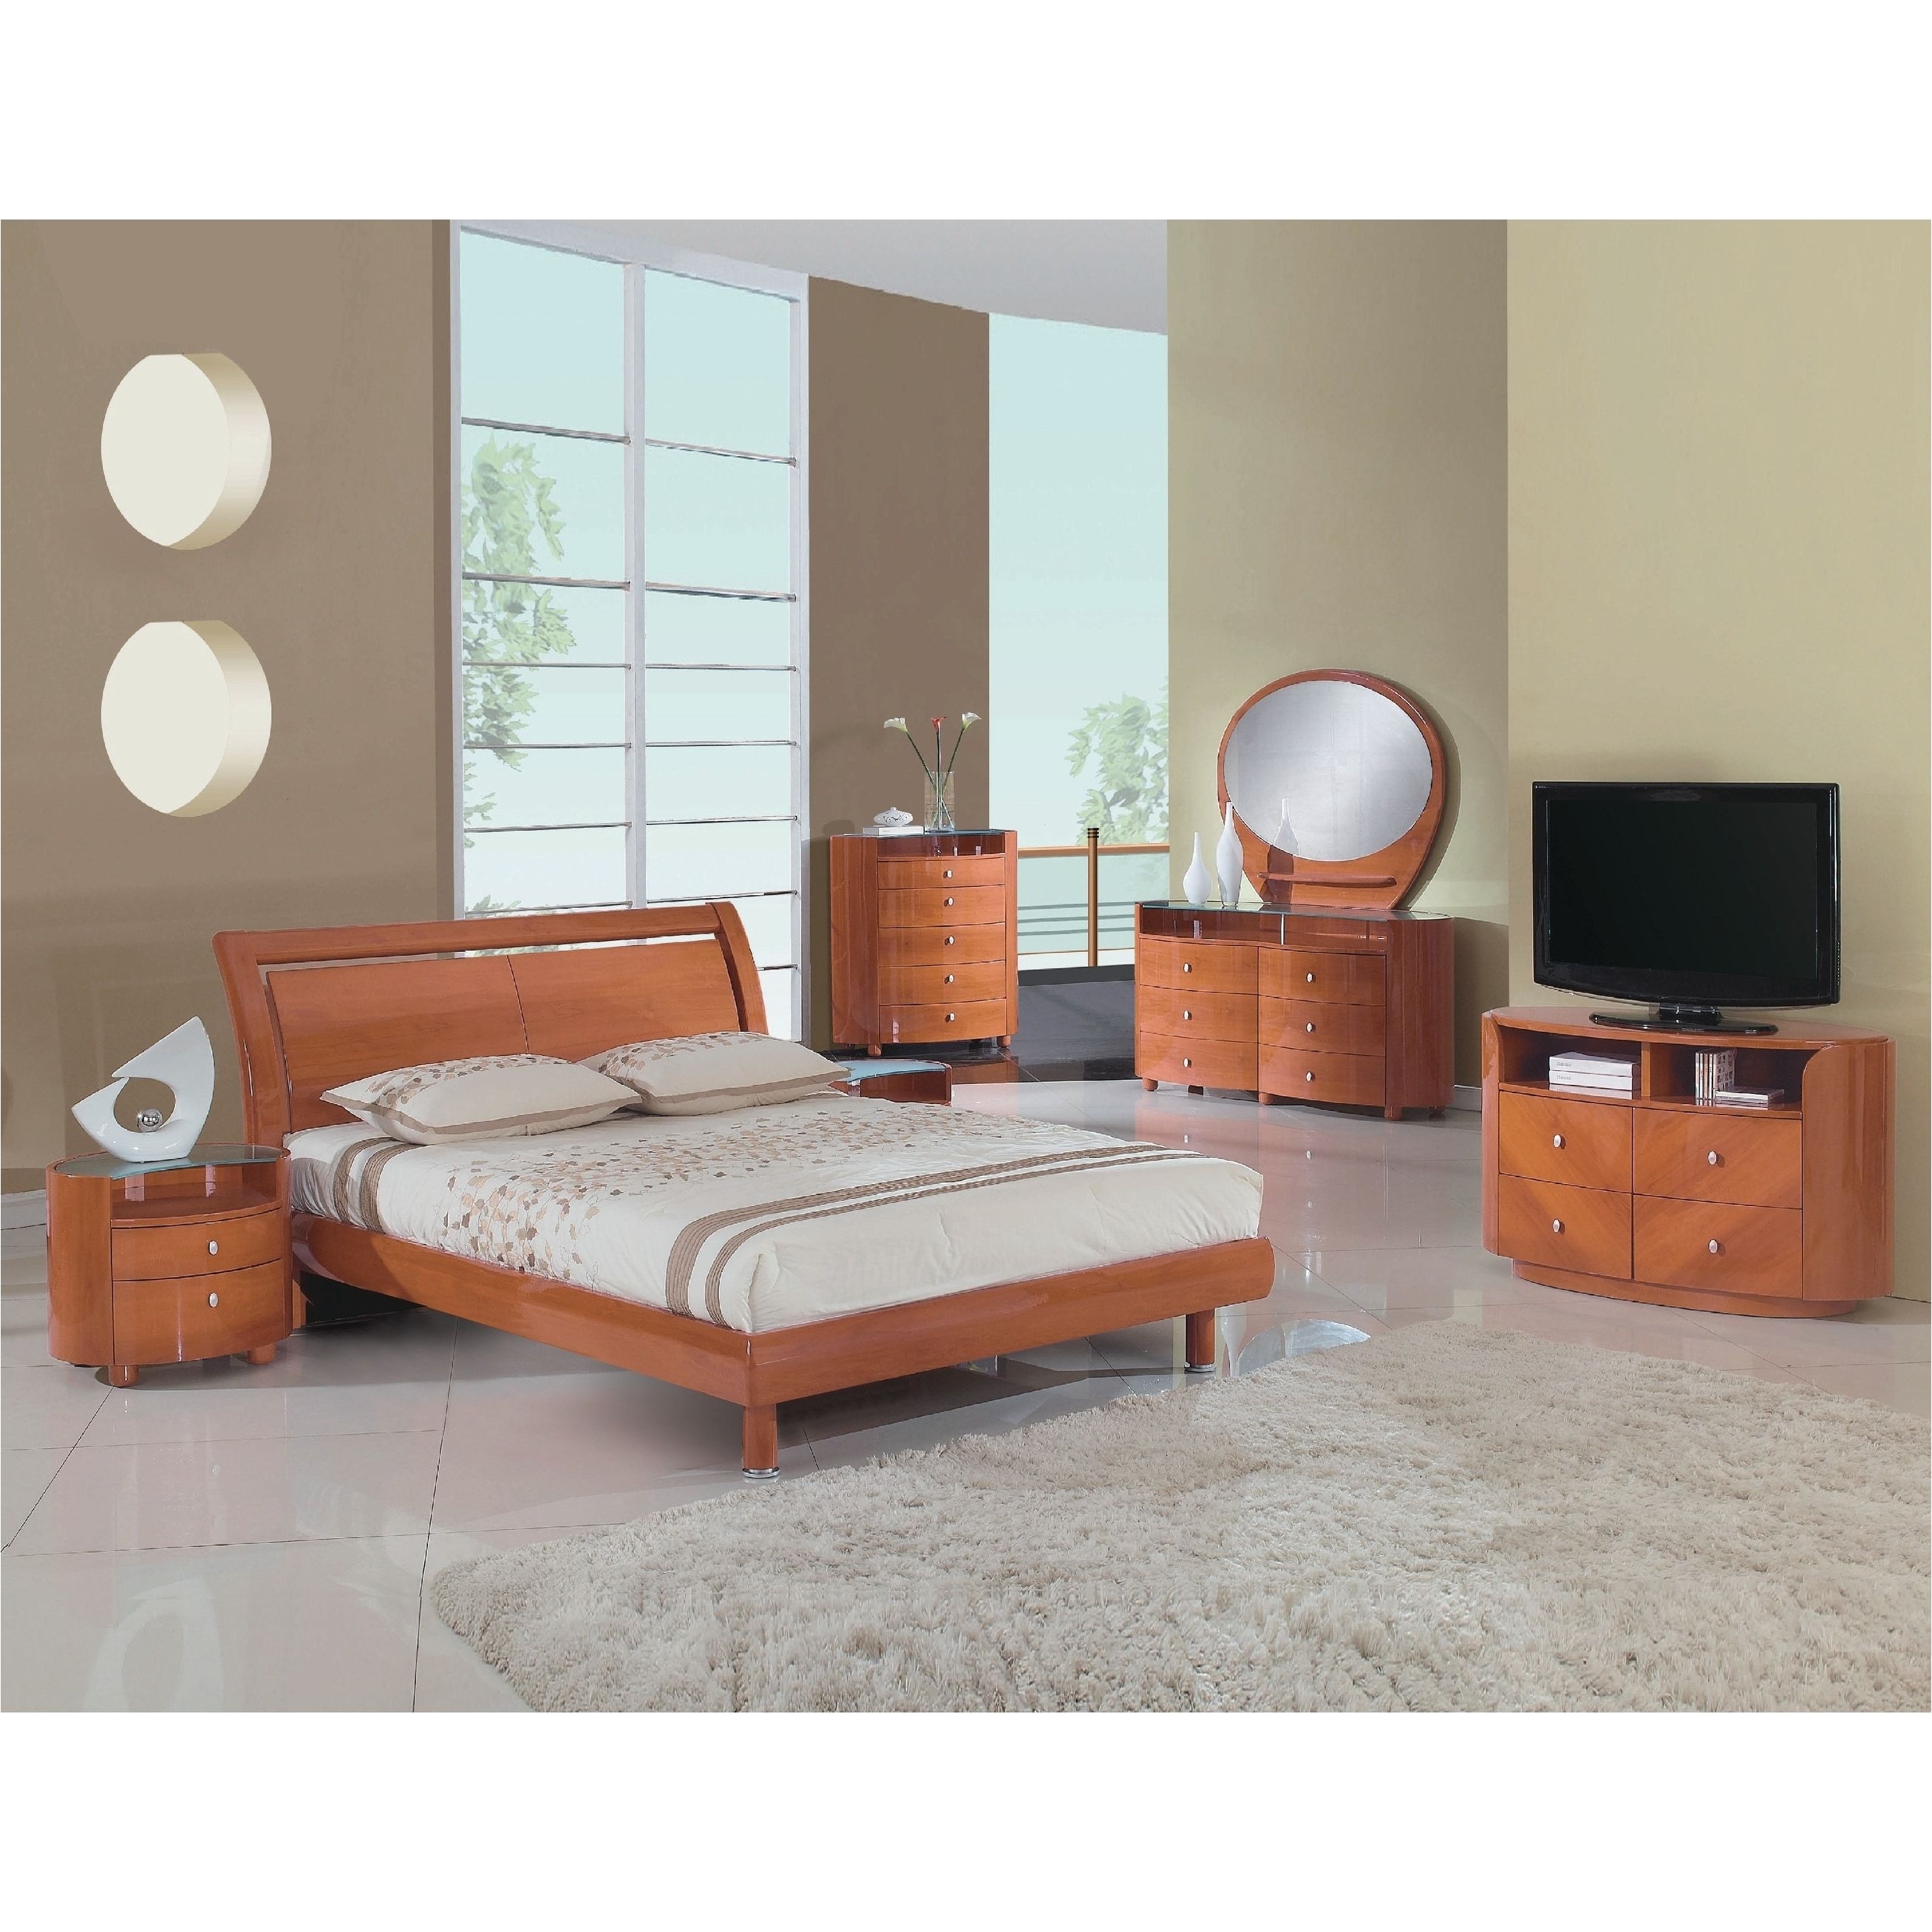 Global United Industries Cosmo Contemporary 4 piece Cherry Red Wood Bedroom Set Queen